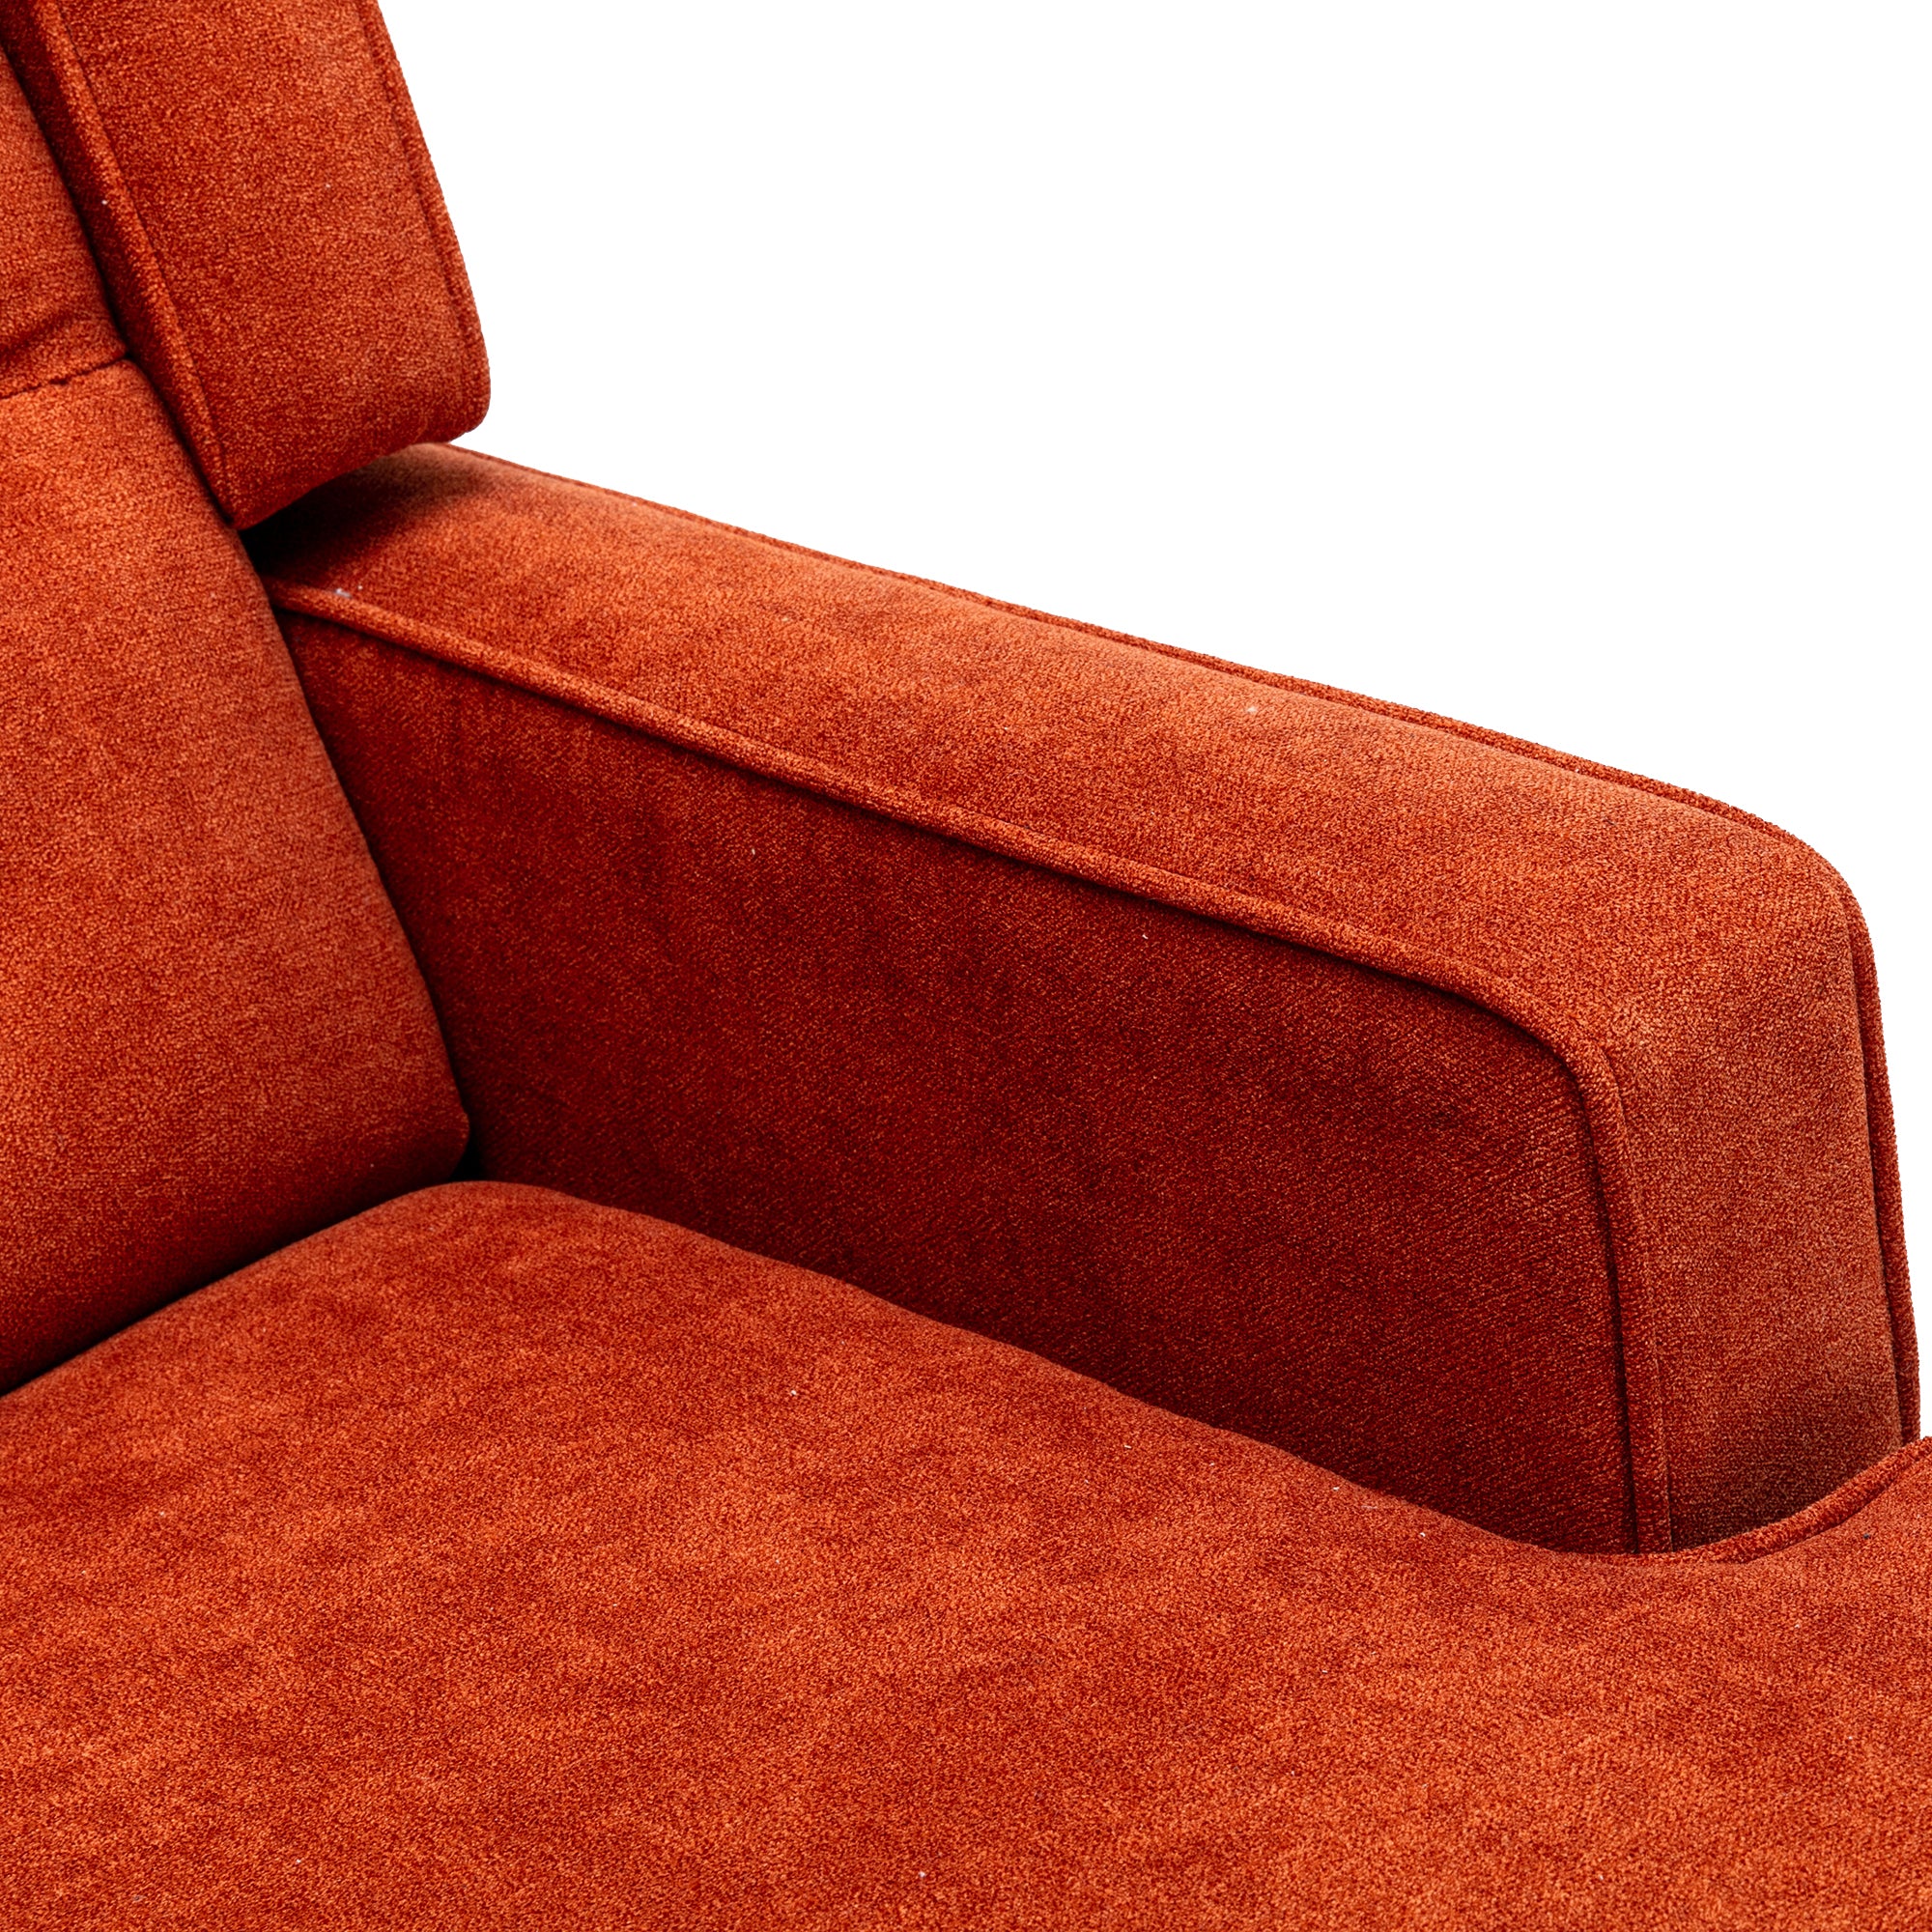 COOLMORE living room Comfortable rocking chair accent orange-polyester